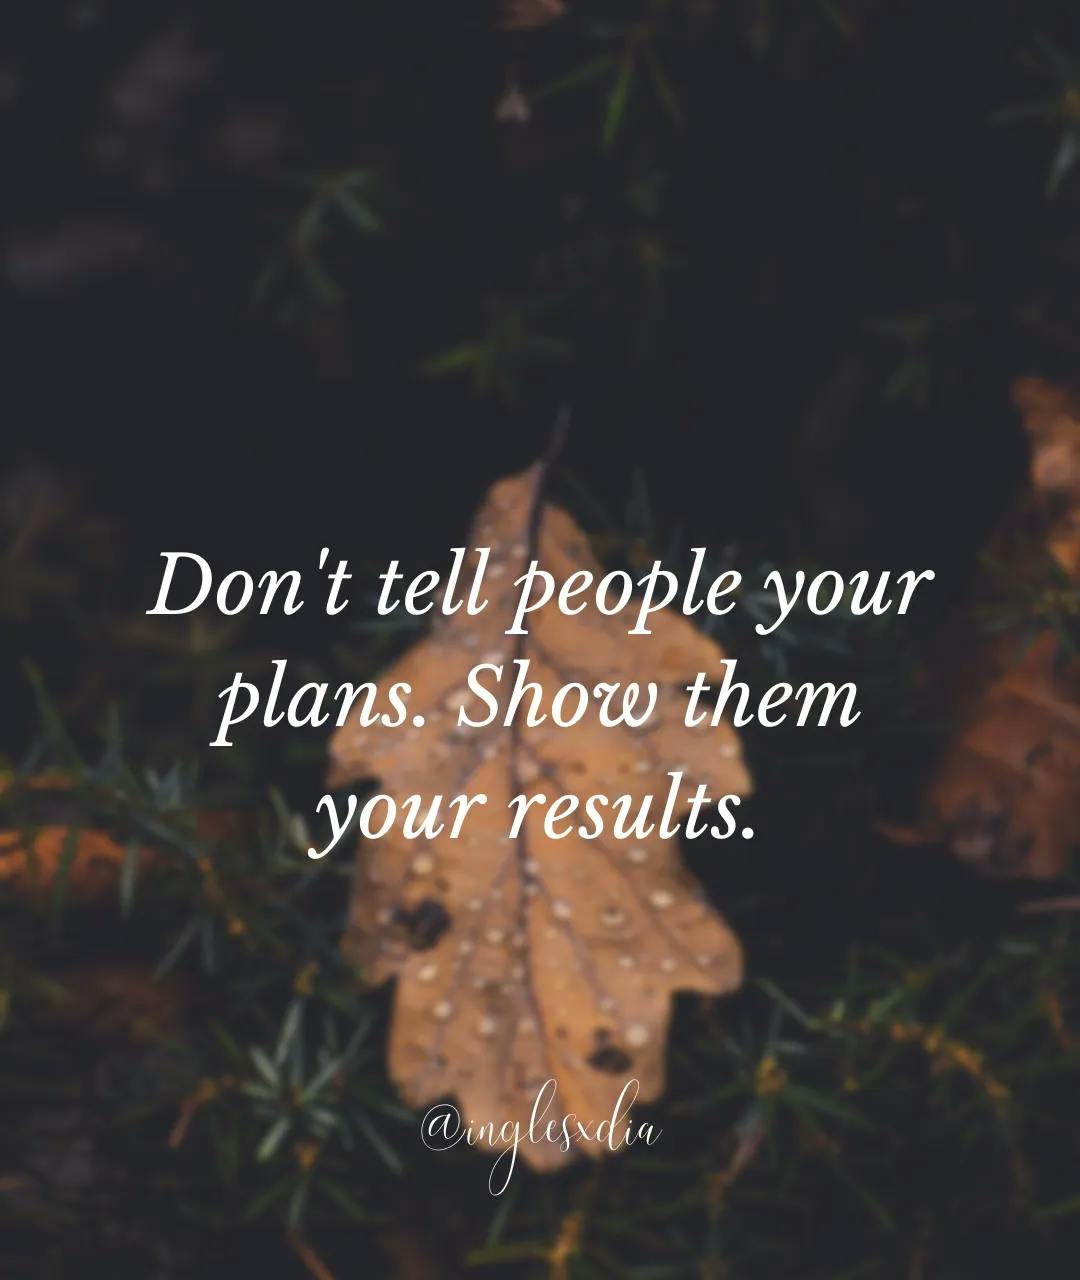 Frases motivadoras en inglés: Don't tell people your plans. Show them your results.